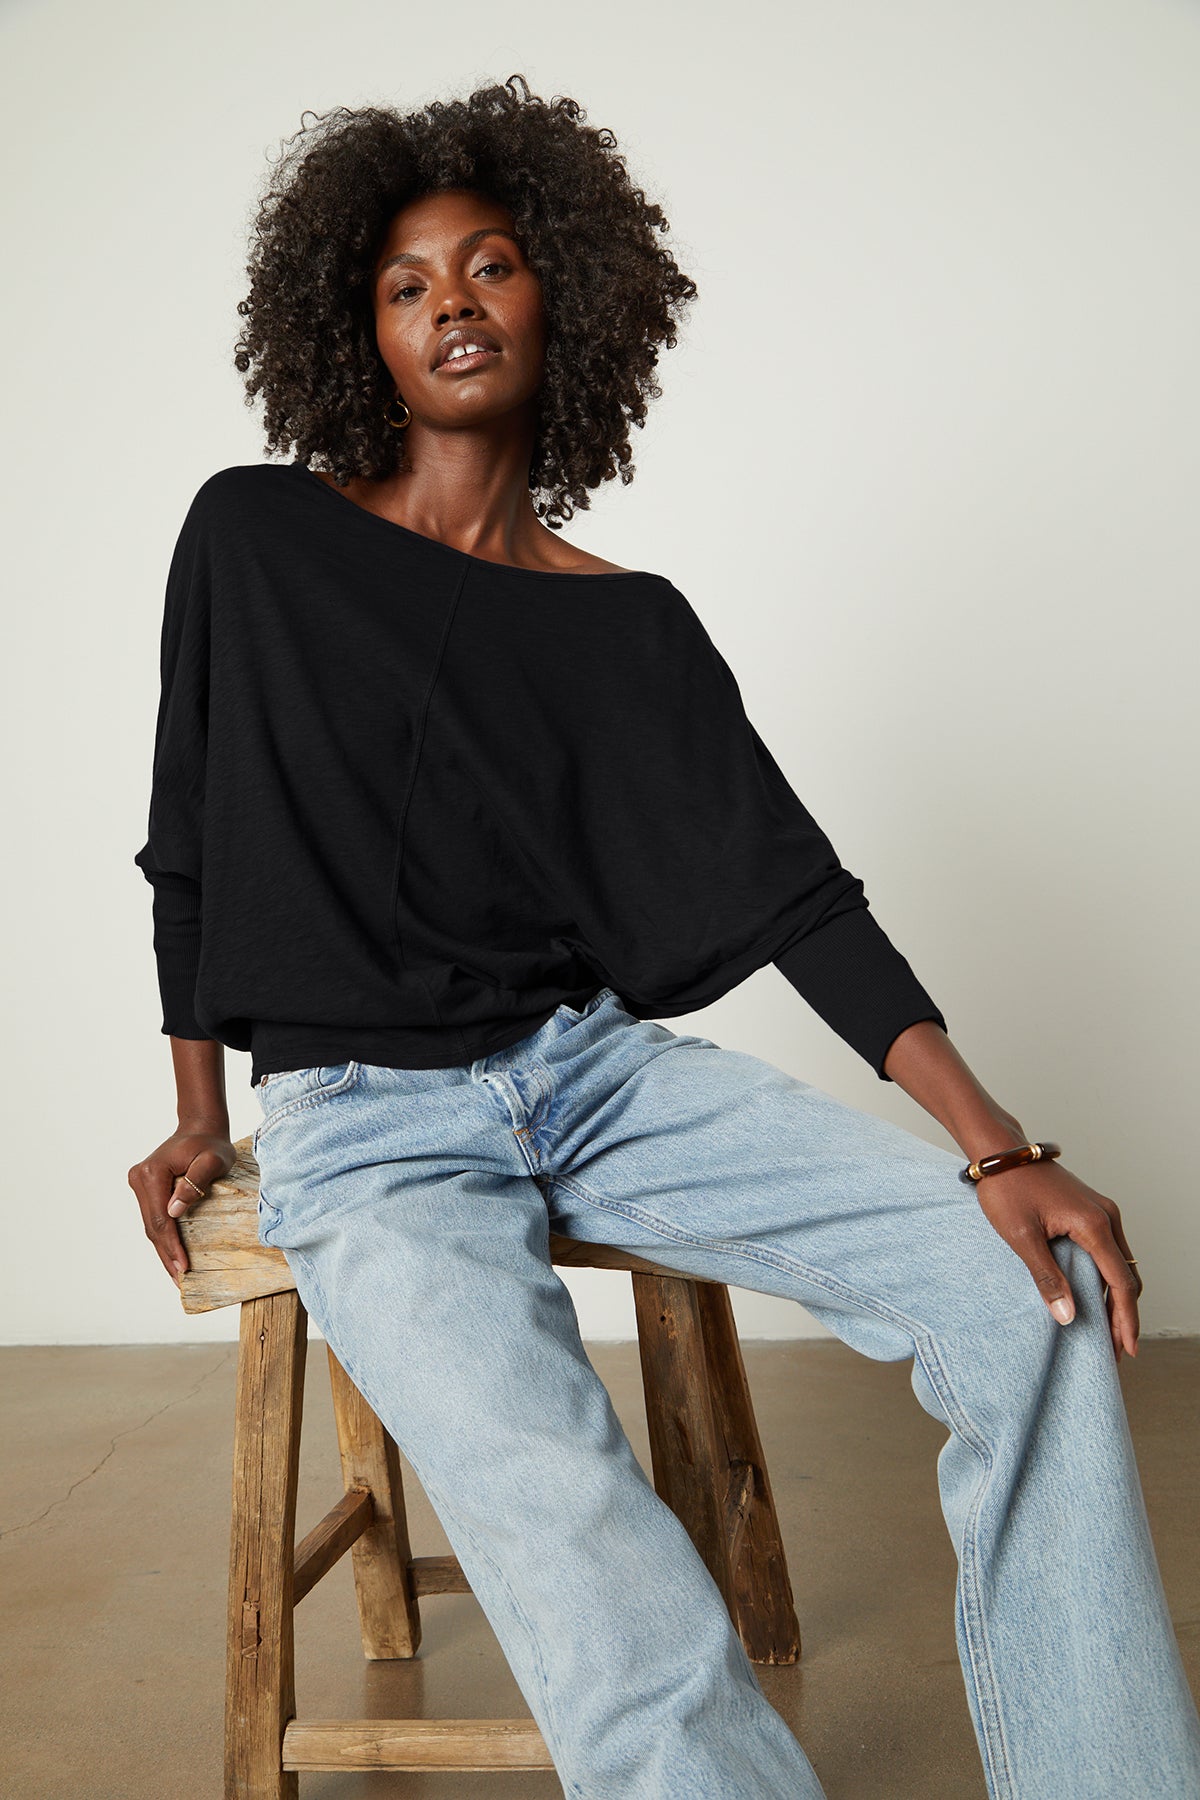 A woman is sitting on a stool wearing JOSS DOLMAN SLEEVE TEE by Velvet by Graham & Spencer jeans and a black top.-26235758313665